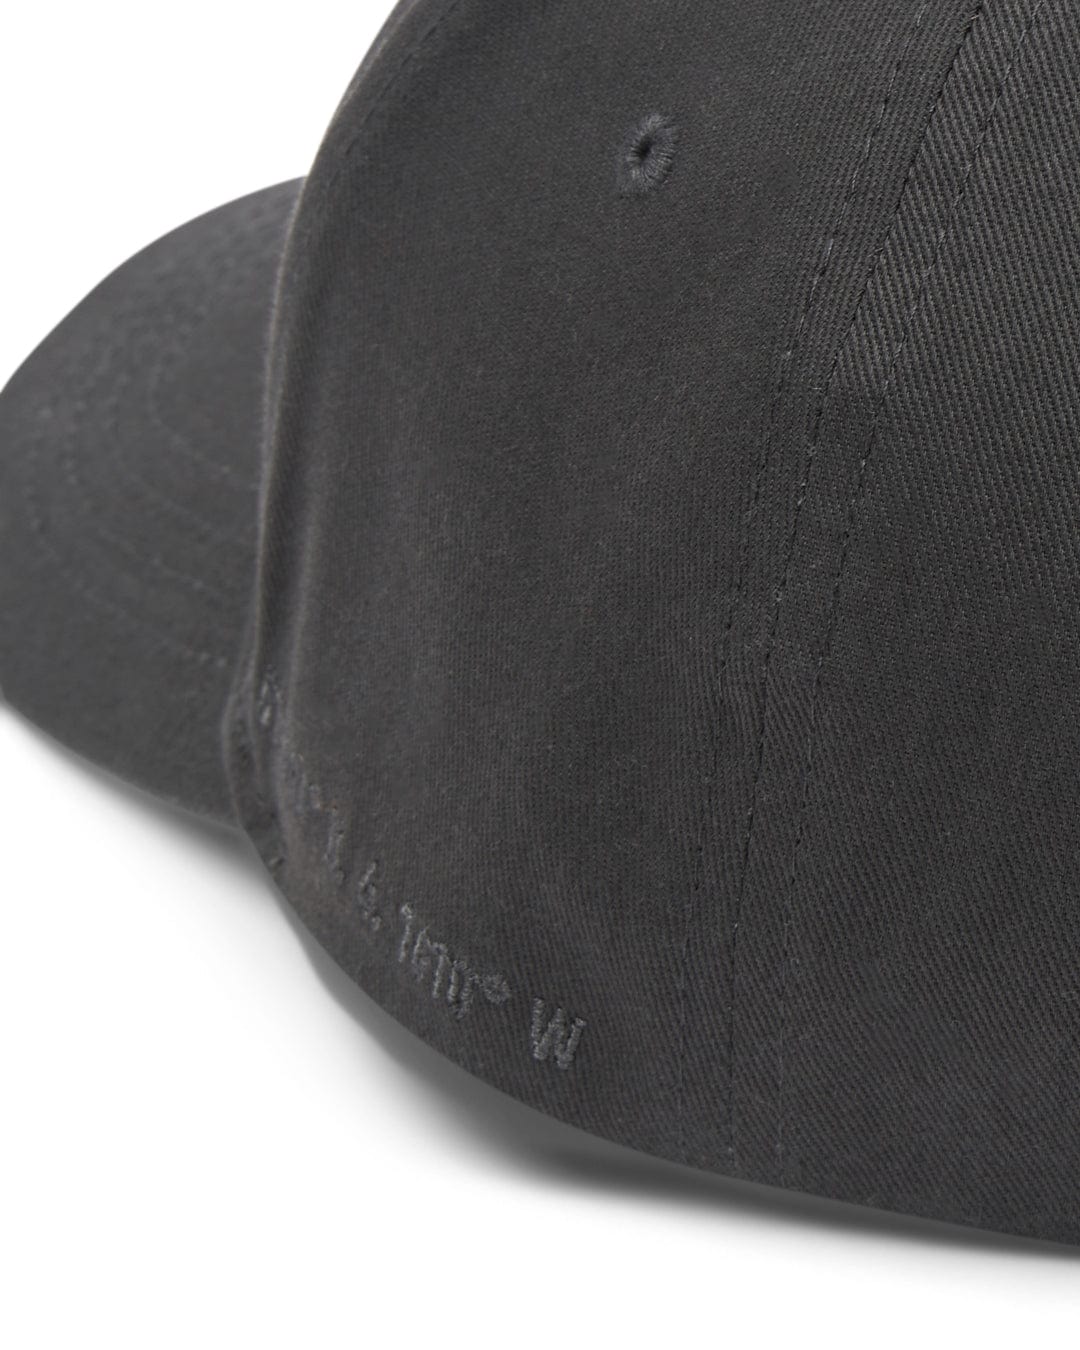 Close-up of a Saltrock Dockyard Cap in Dark Grey showing texture and stitch detail.